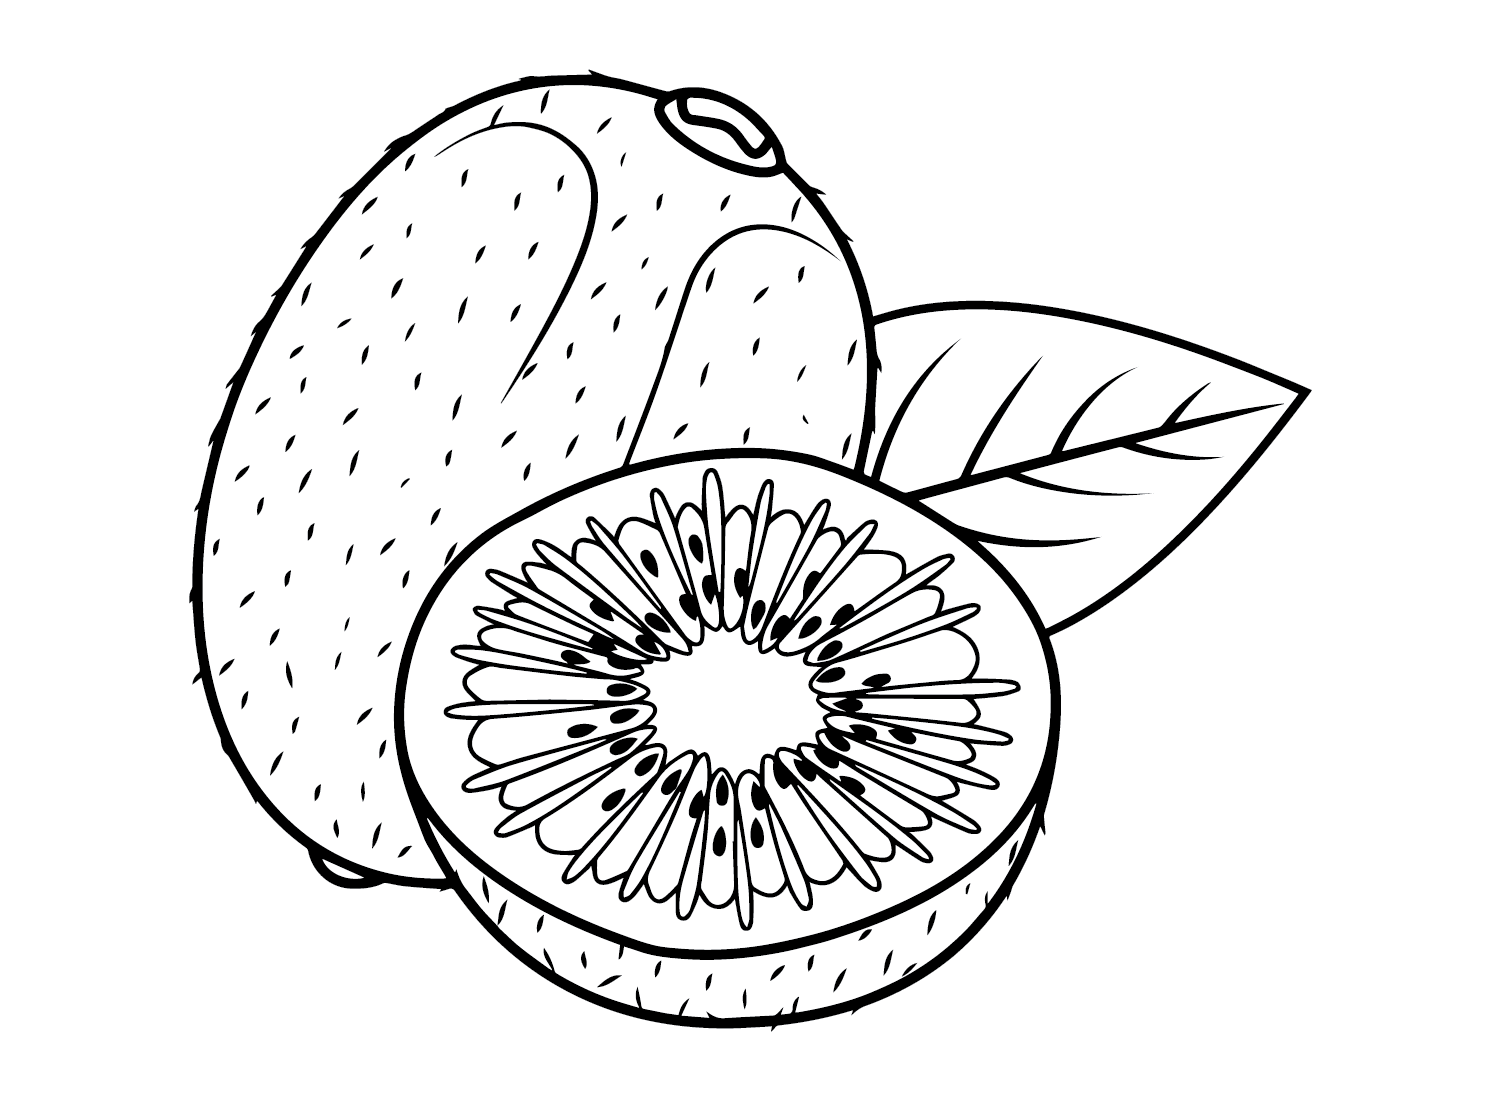 Pictures Kiwi Fruit Coloring Page